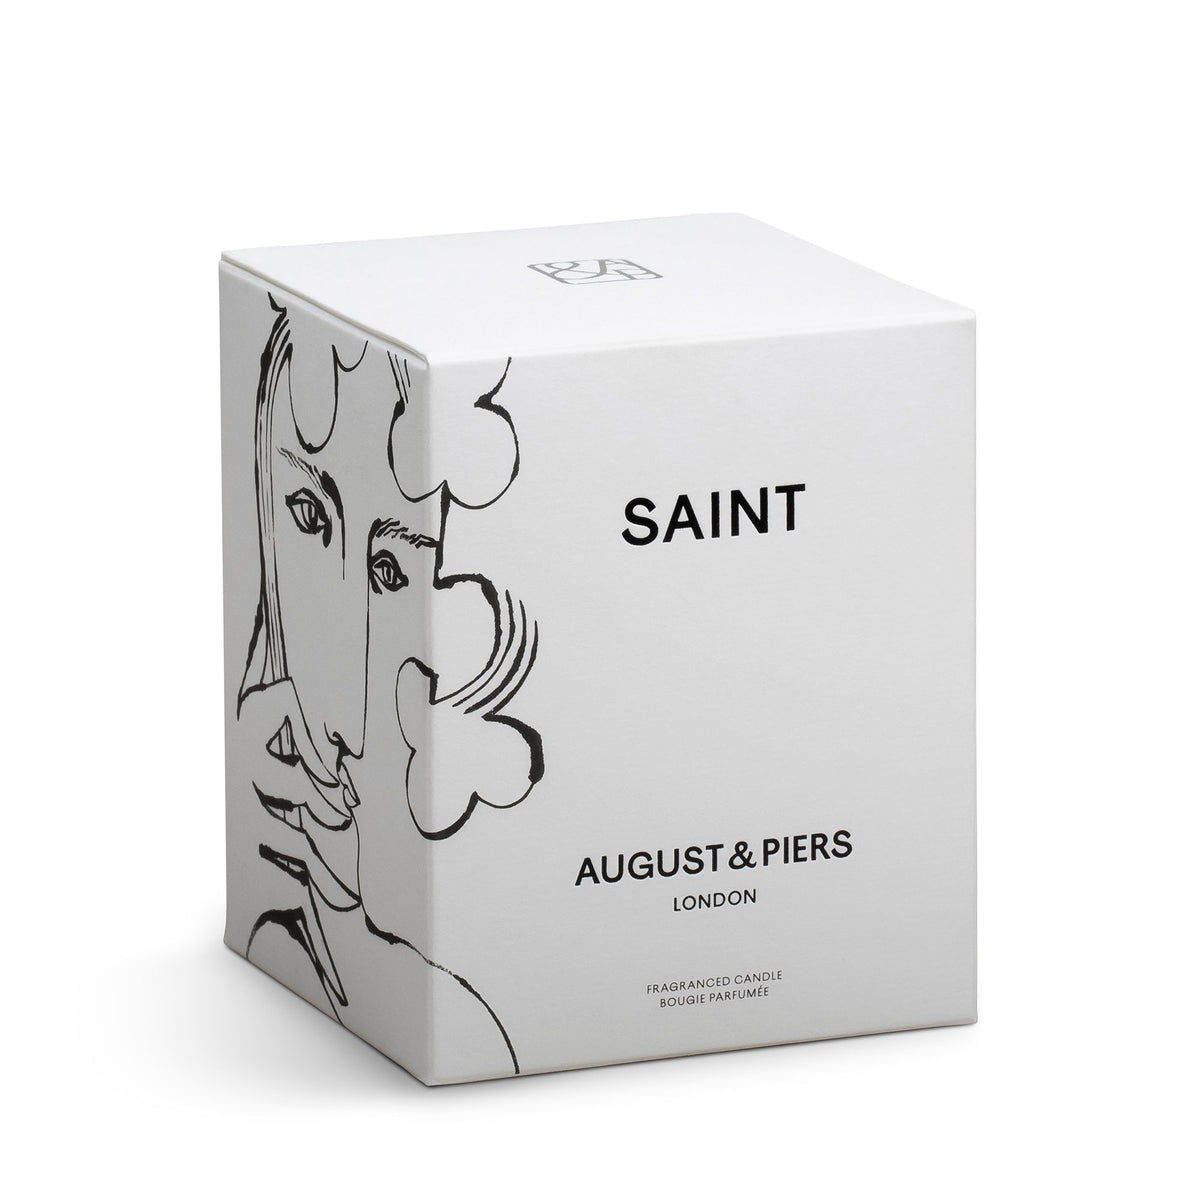 August & Piers Saint Scented Candle